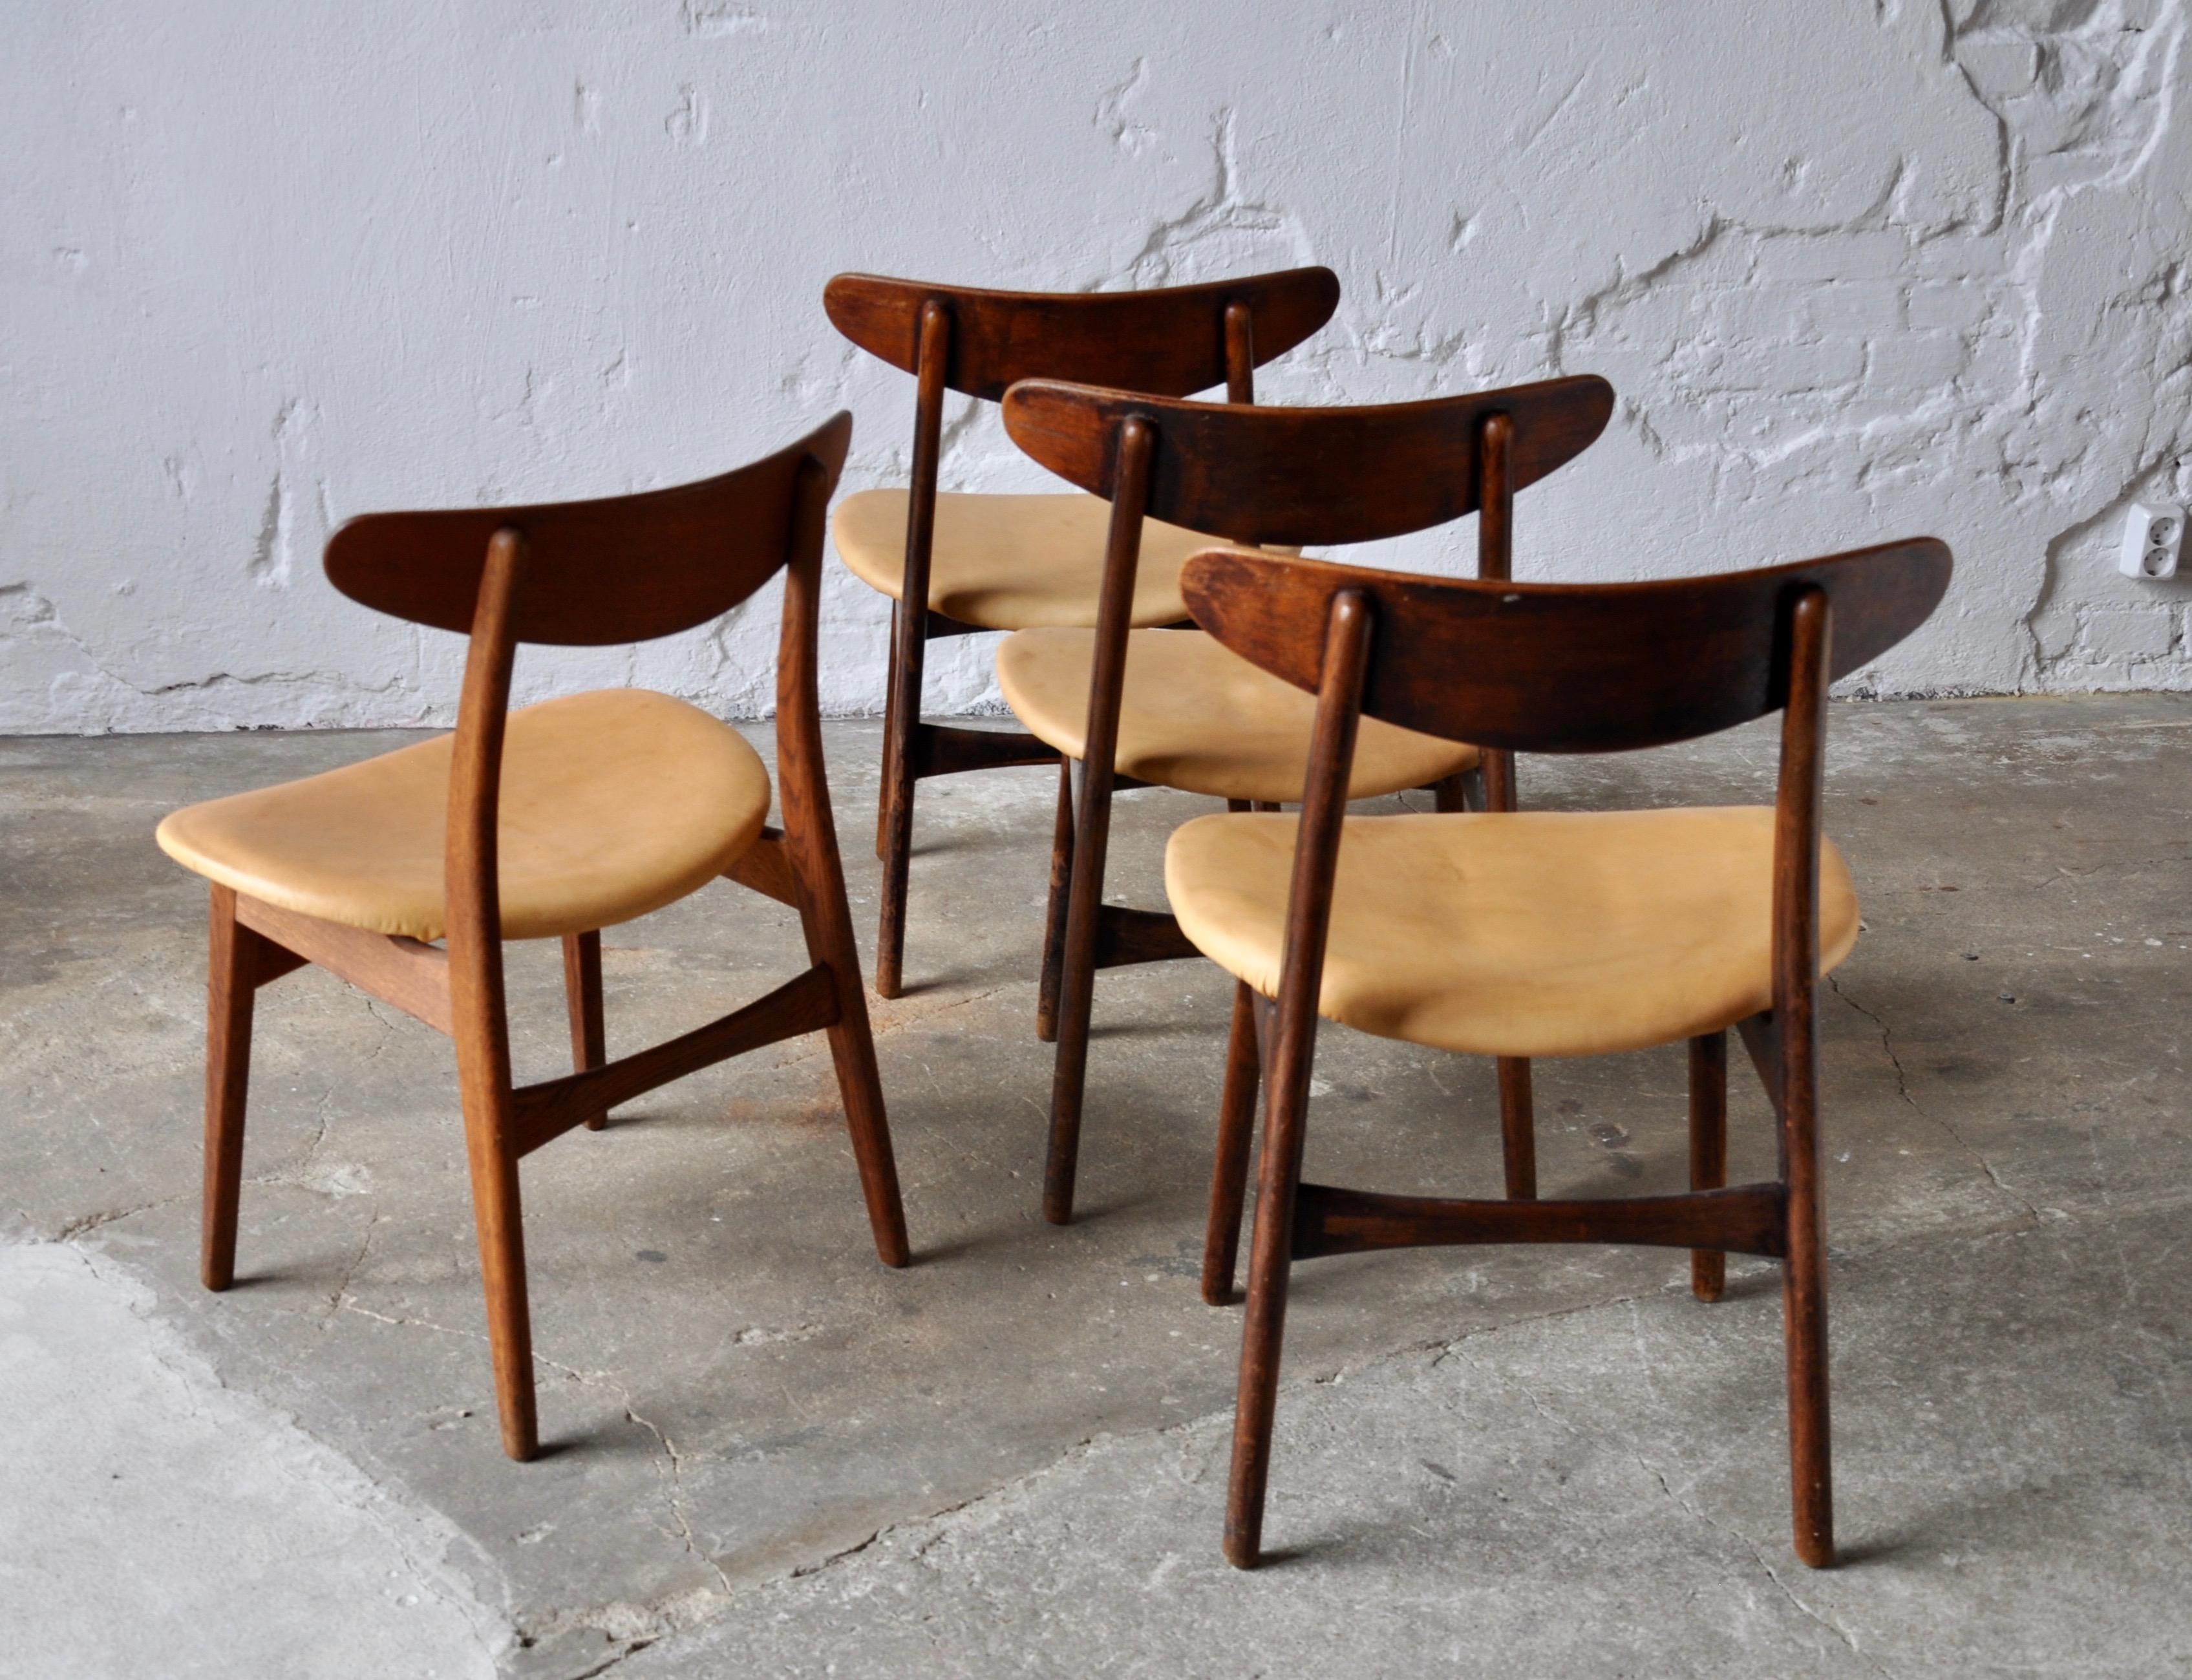 Hans J. Wegner, set of 4 CH30 chairs, Denmark, 1960s

The chairs show traces of use and wear, 
In our opinion considered as excellent patina 

Newer leather also show traces of nice patina.